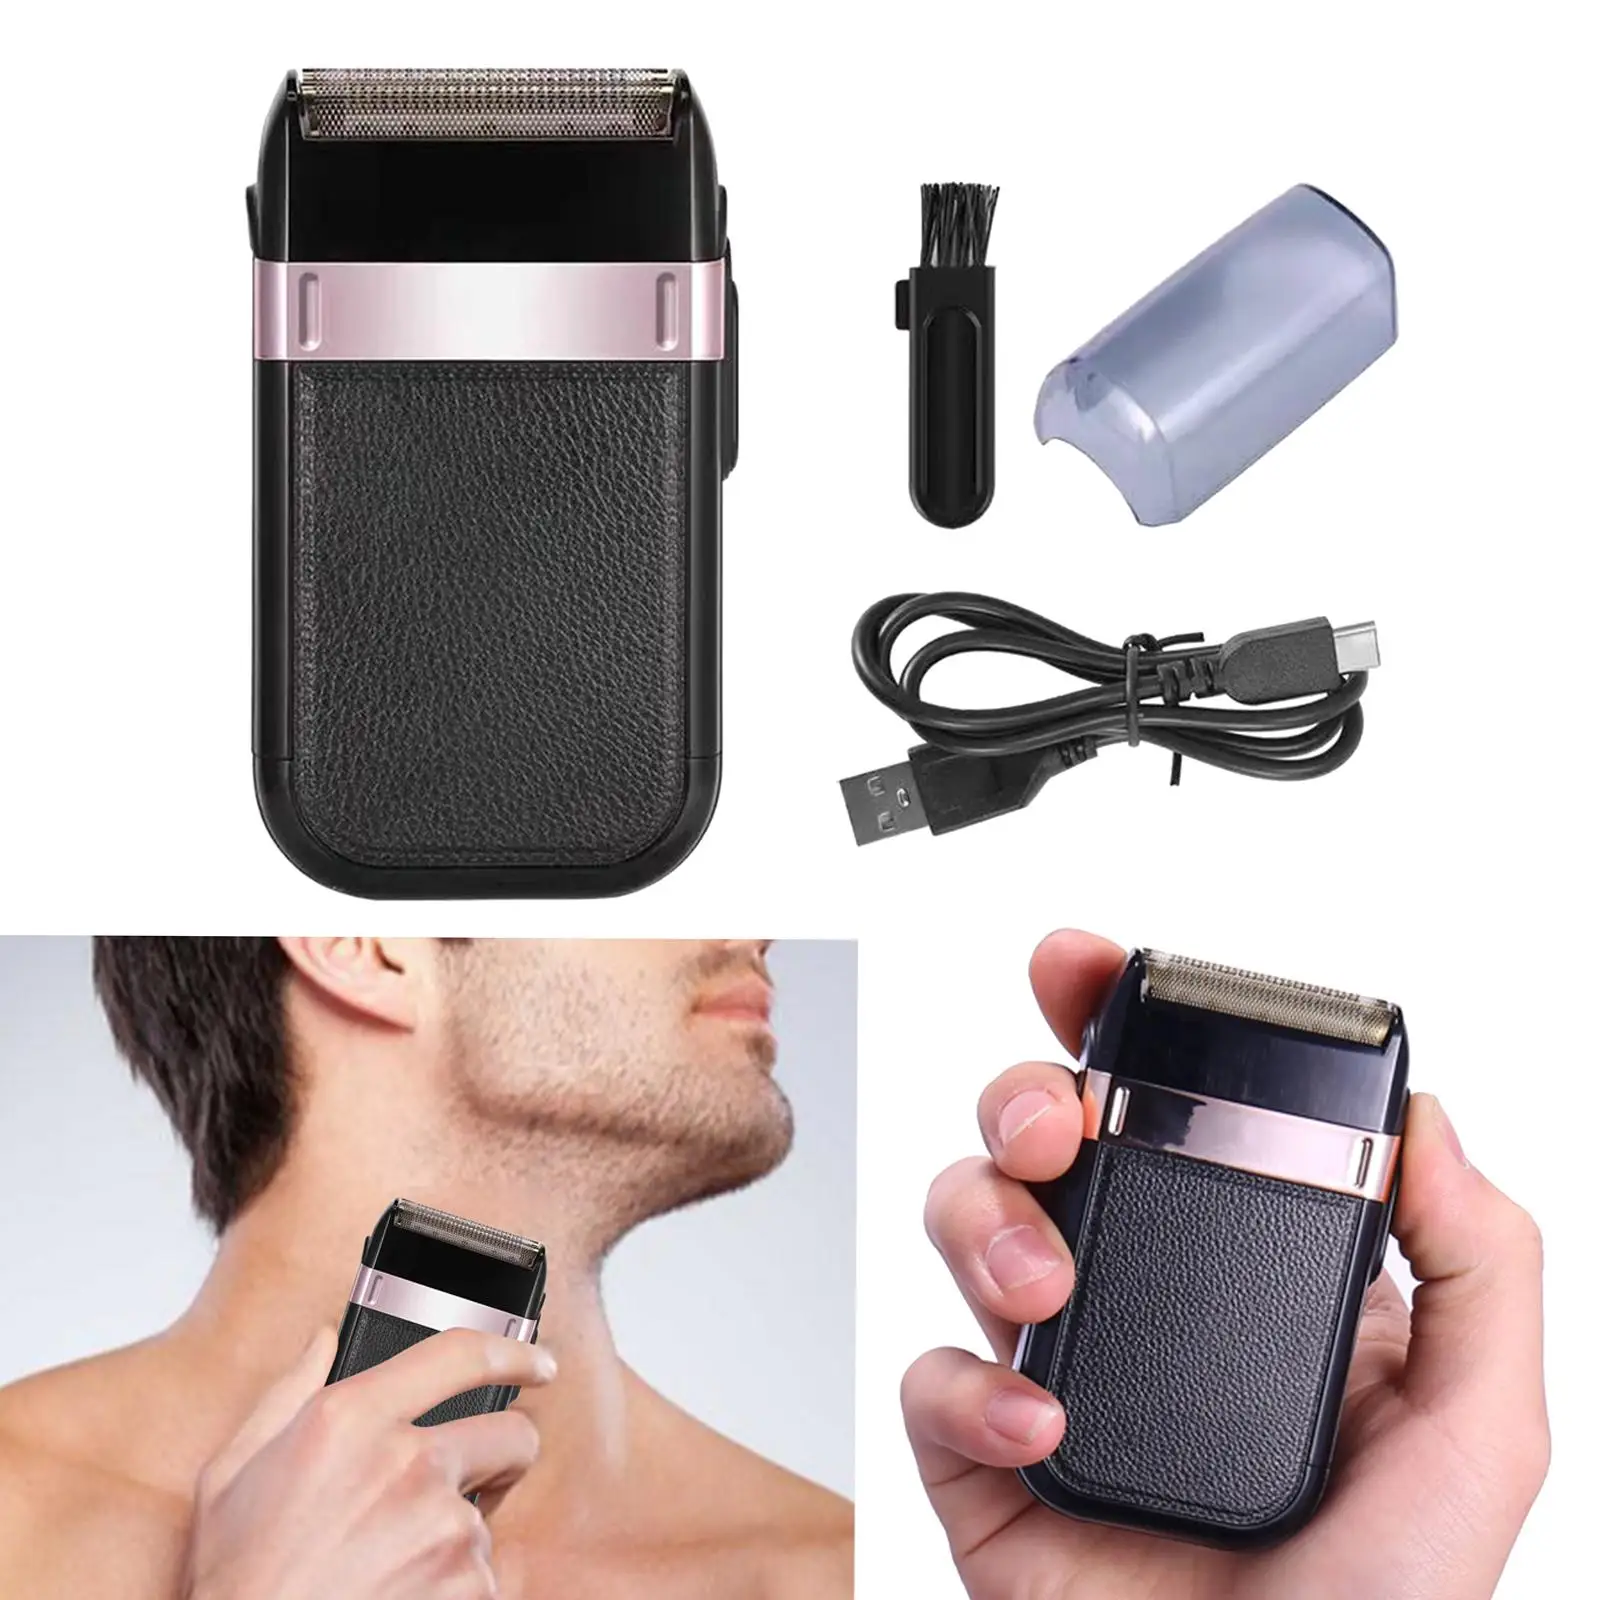 

Men Retro Electric Razor Mini Washable Cutter Head 3D Suspension Portable Reciprocating Wet Dry Use Shaver for Home Use Travel